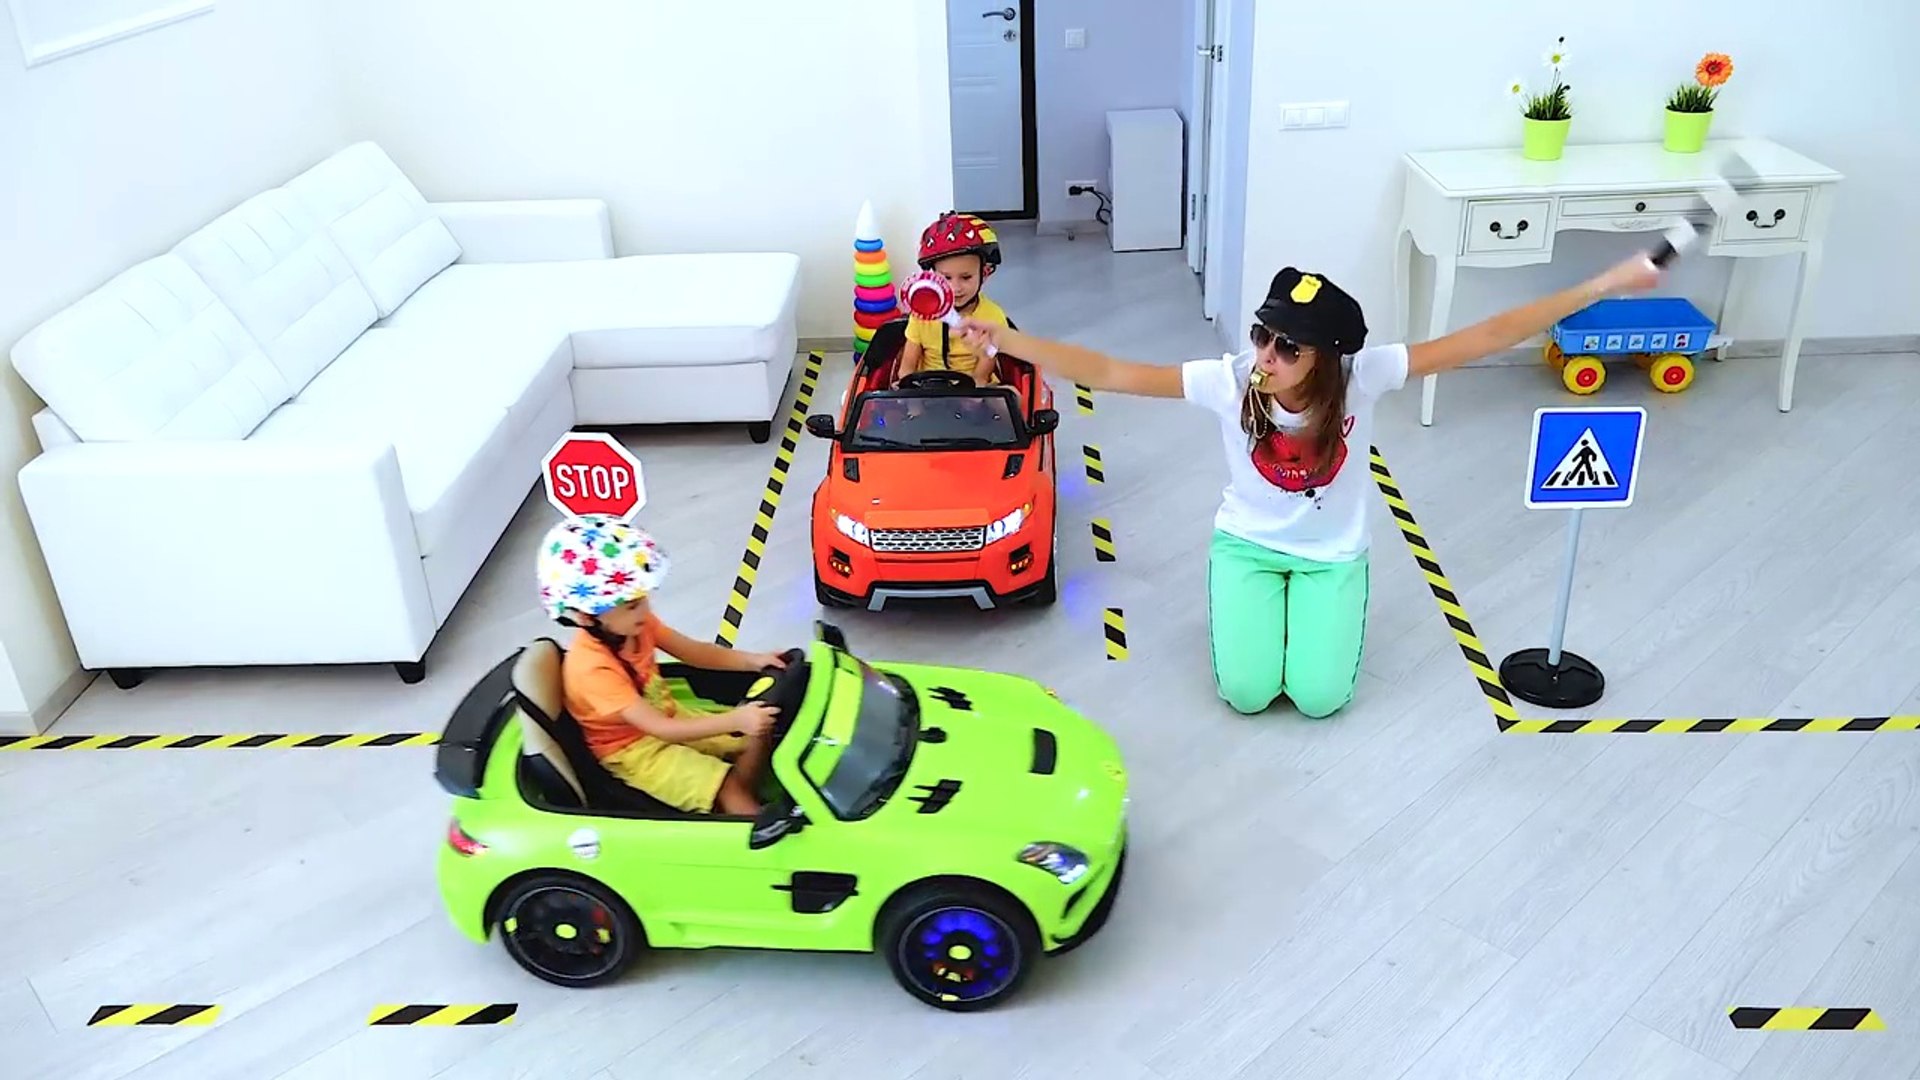 vlad and nikita pretend play with toy cars